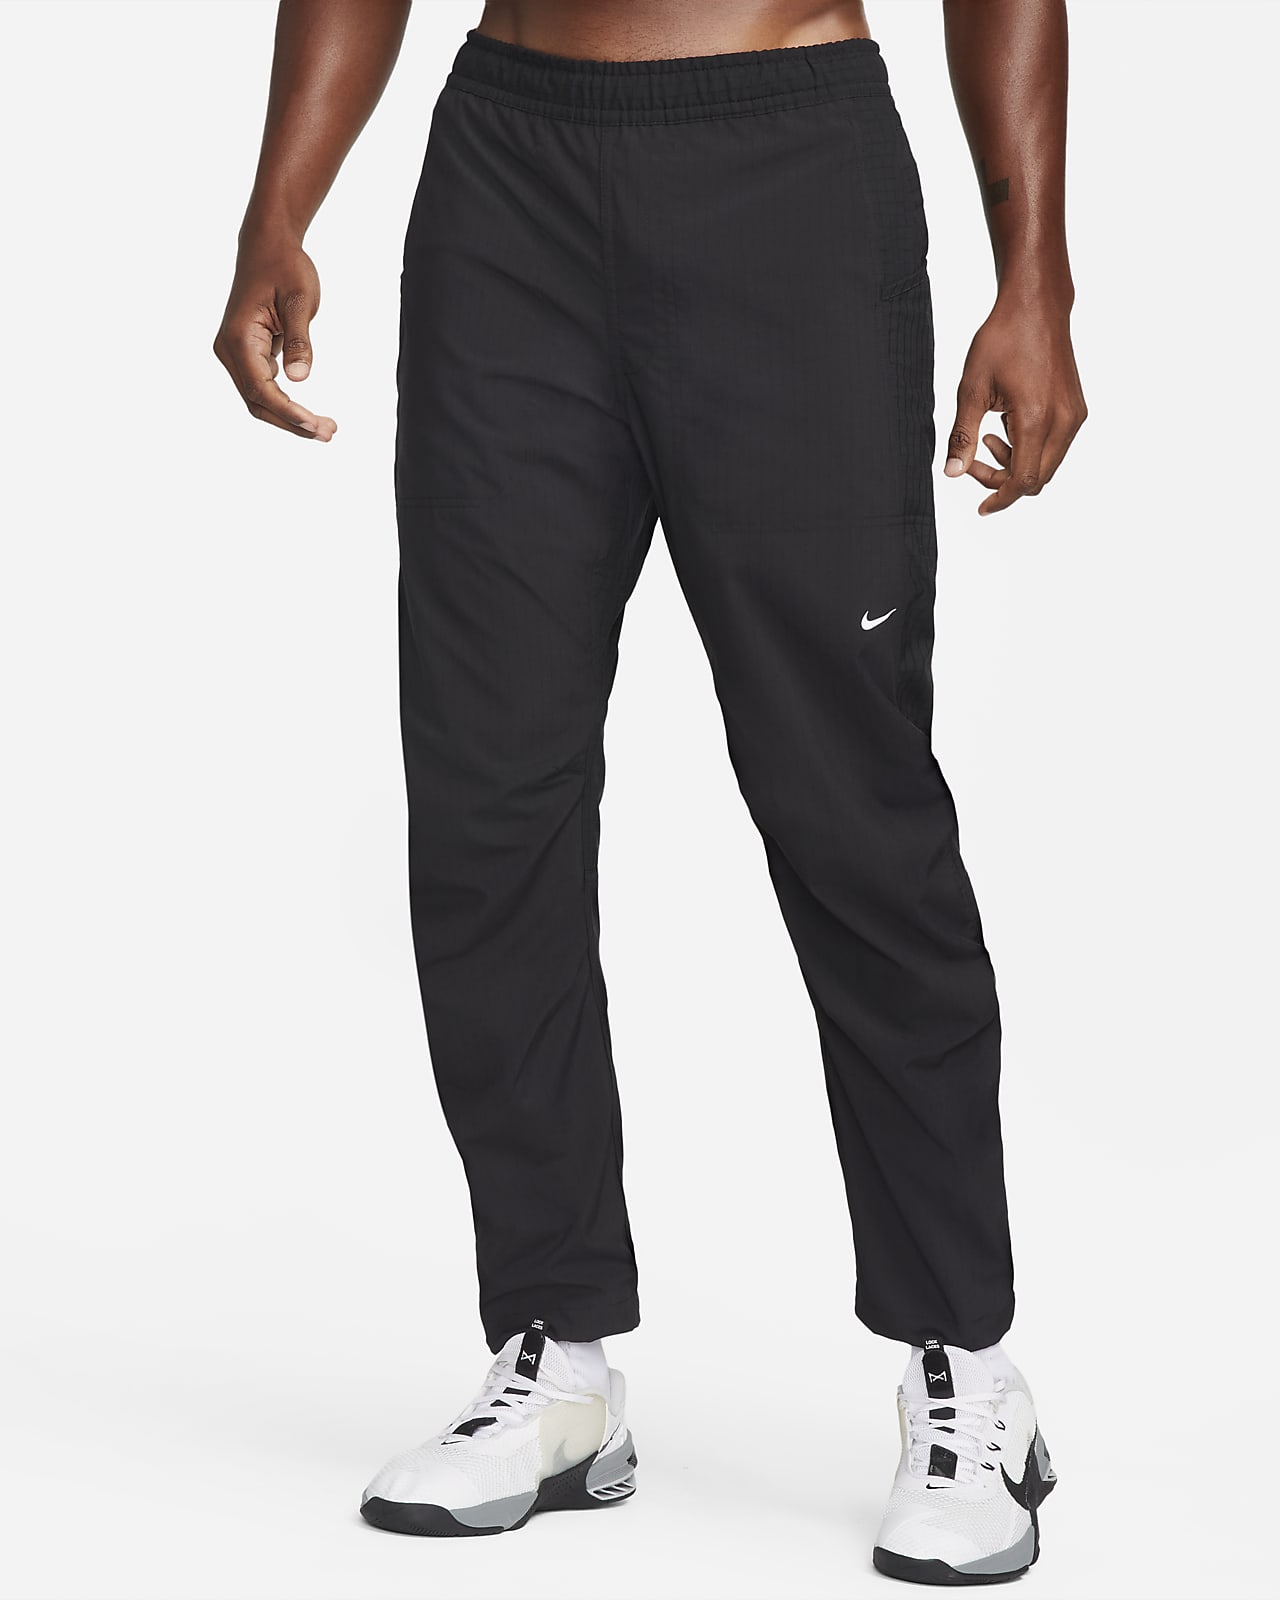 Dri-FIT ADV A.P.S. Woven Fitness Trousers. Nike